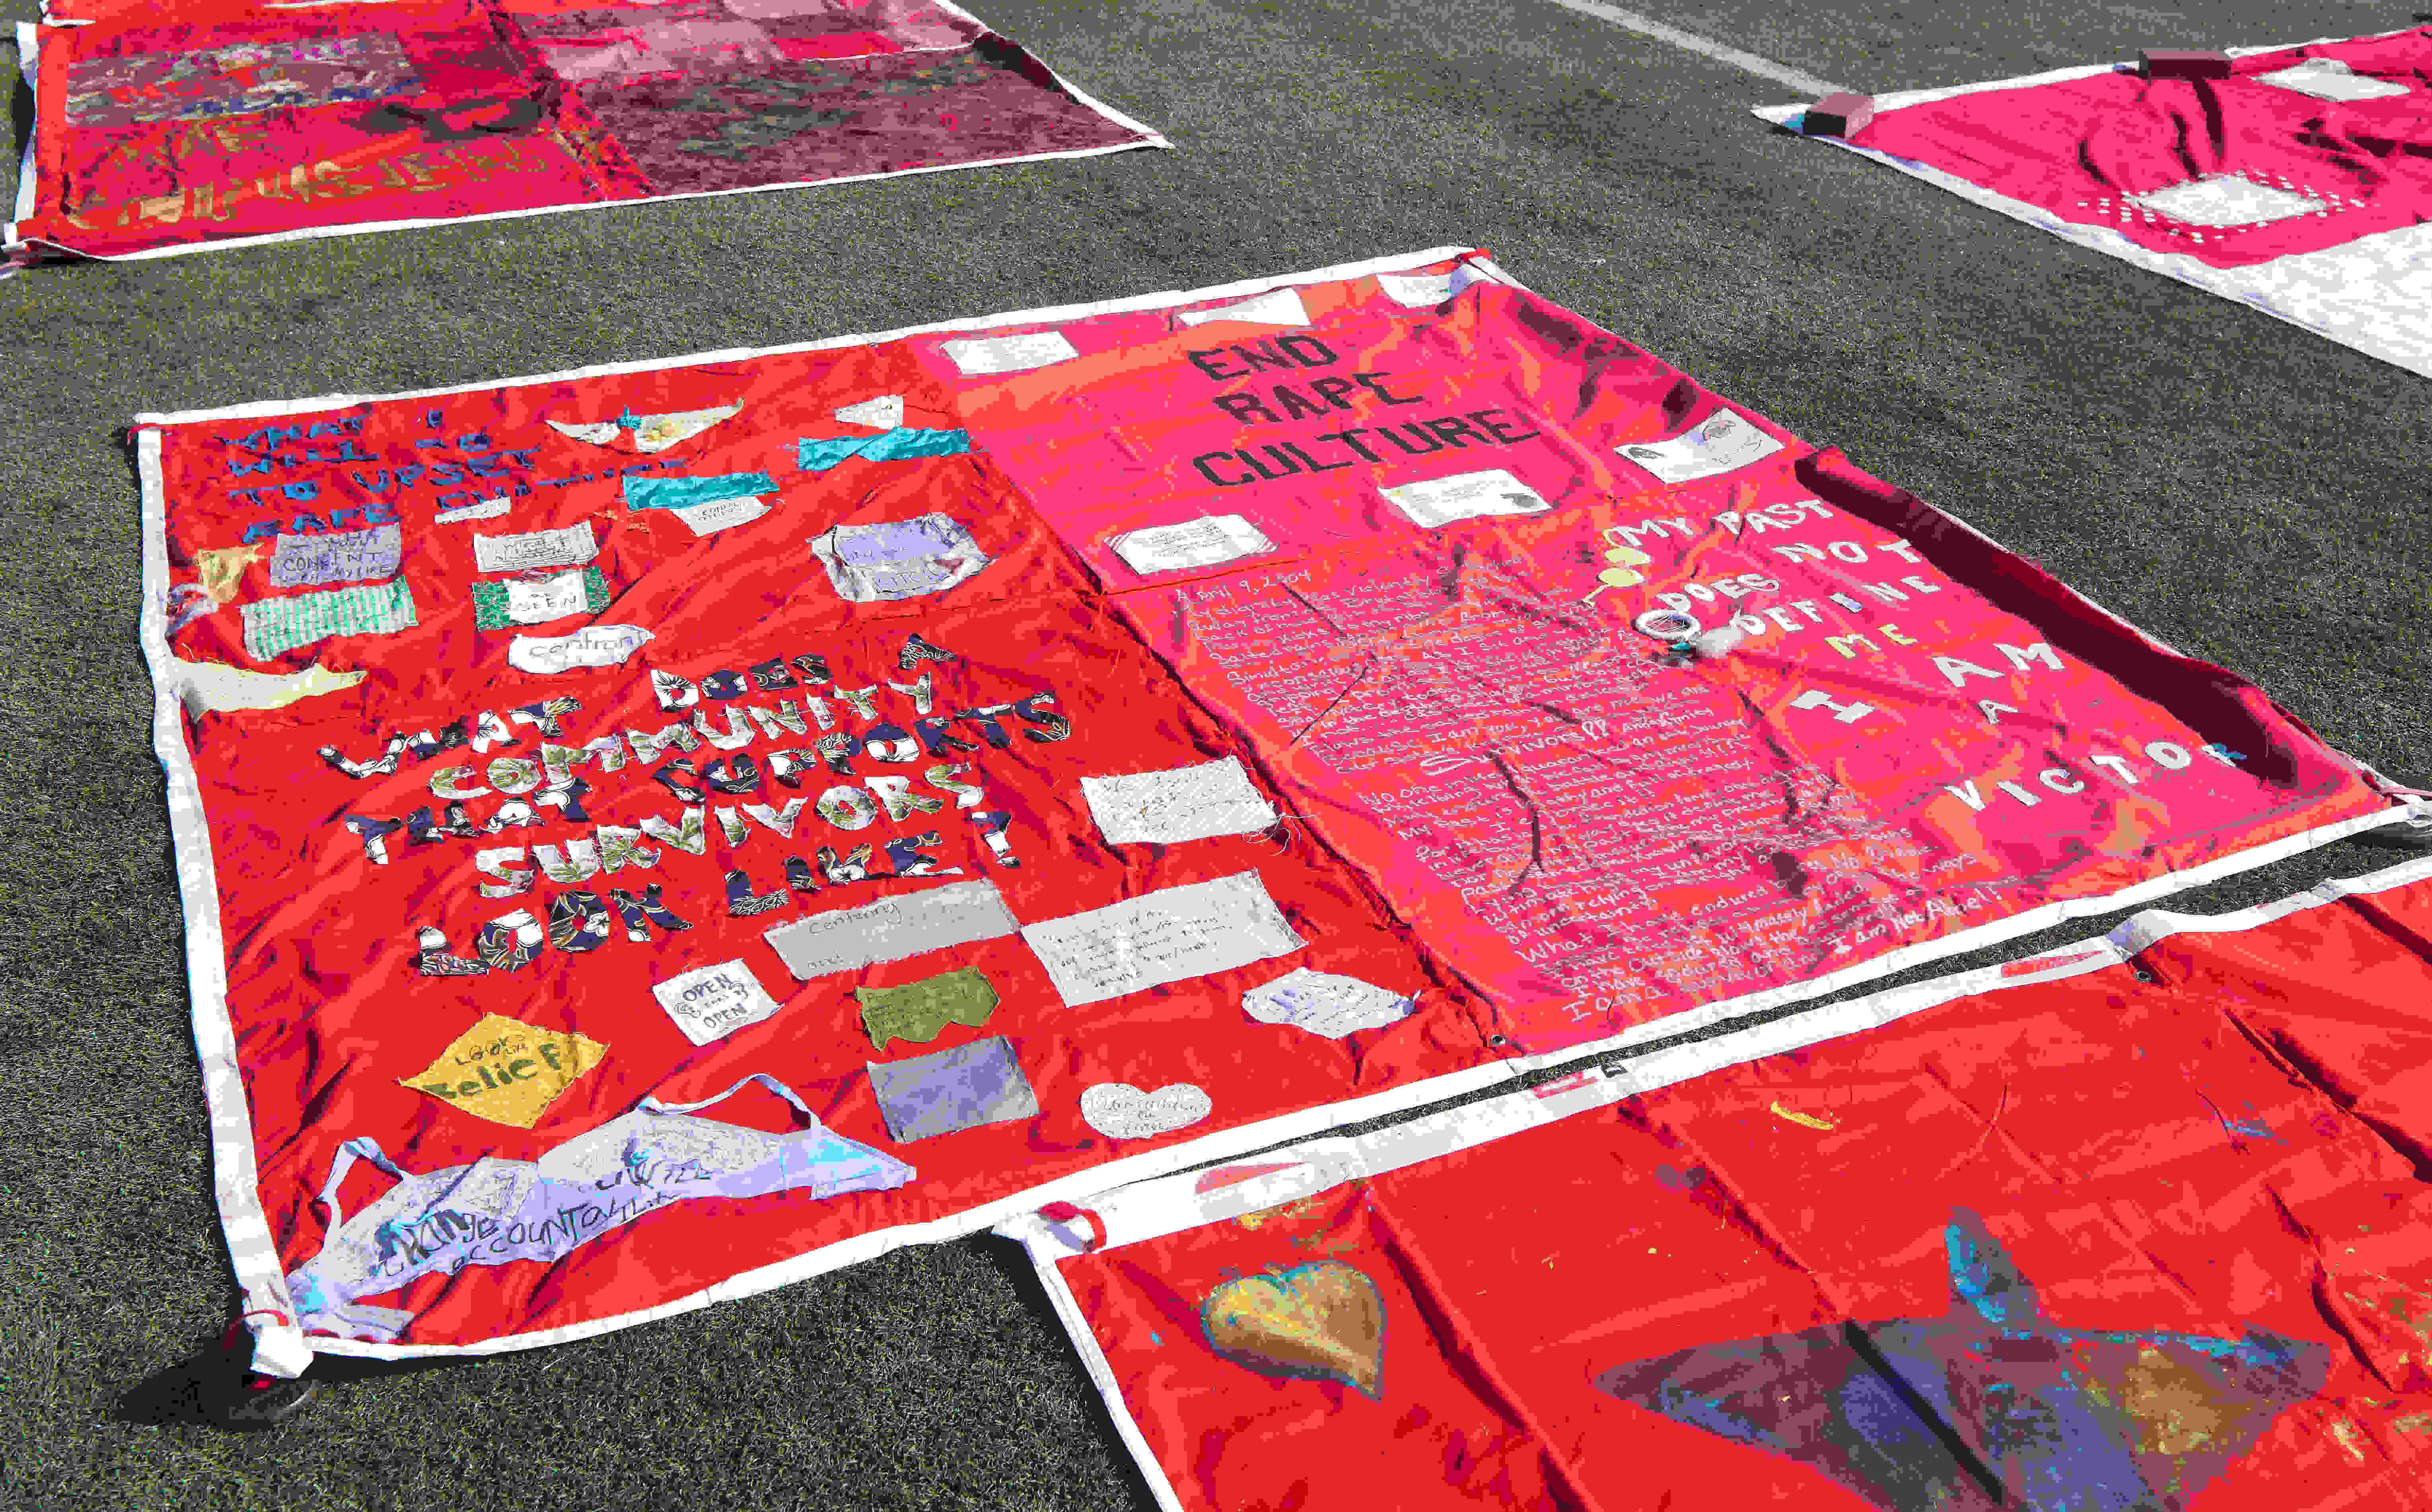 The Monument Quilt is an ever-evolving collection of stories that are written, stitched, and painted onto red fabric to commemorate and empower victims of sexual abuse. Photo by Evan Leonard